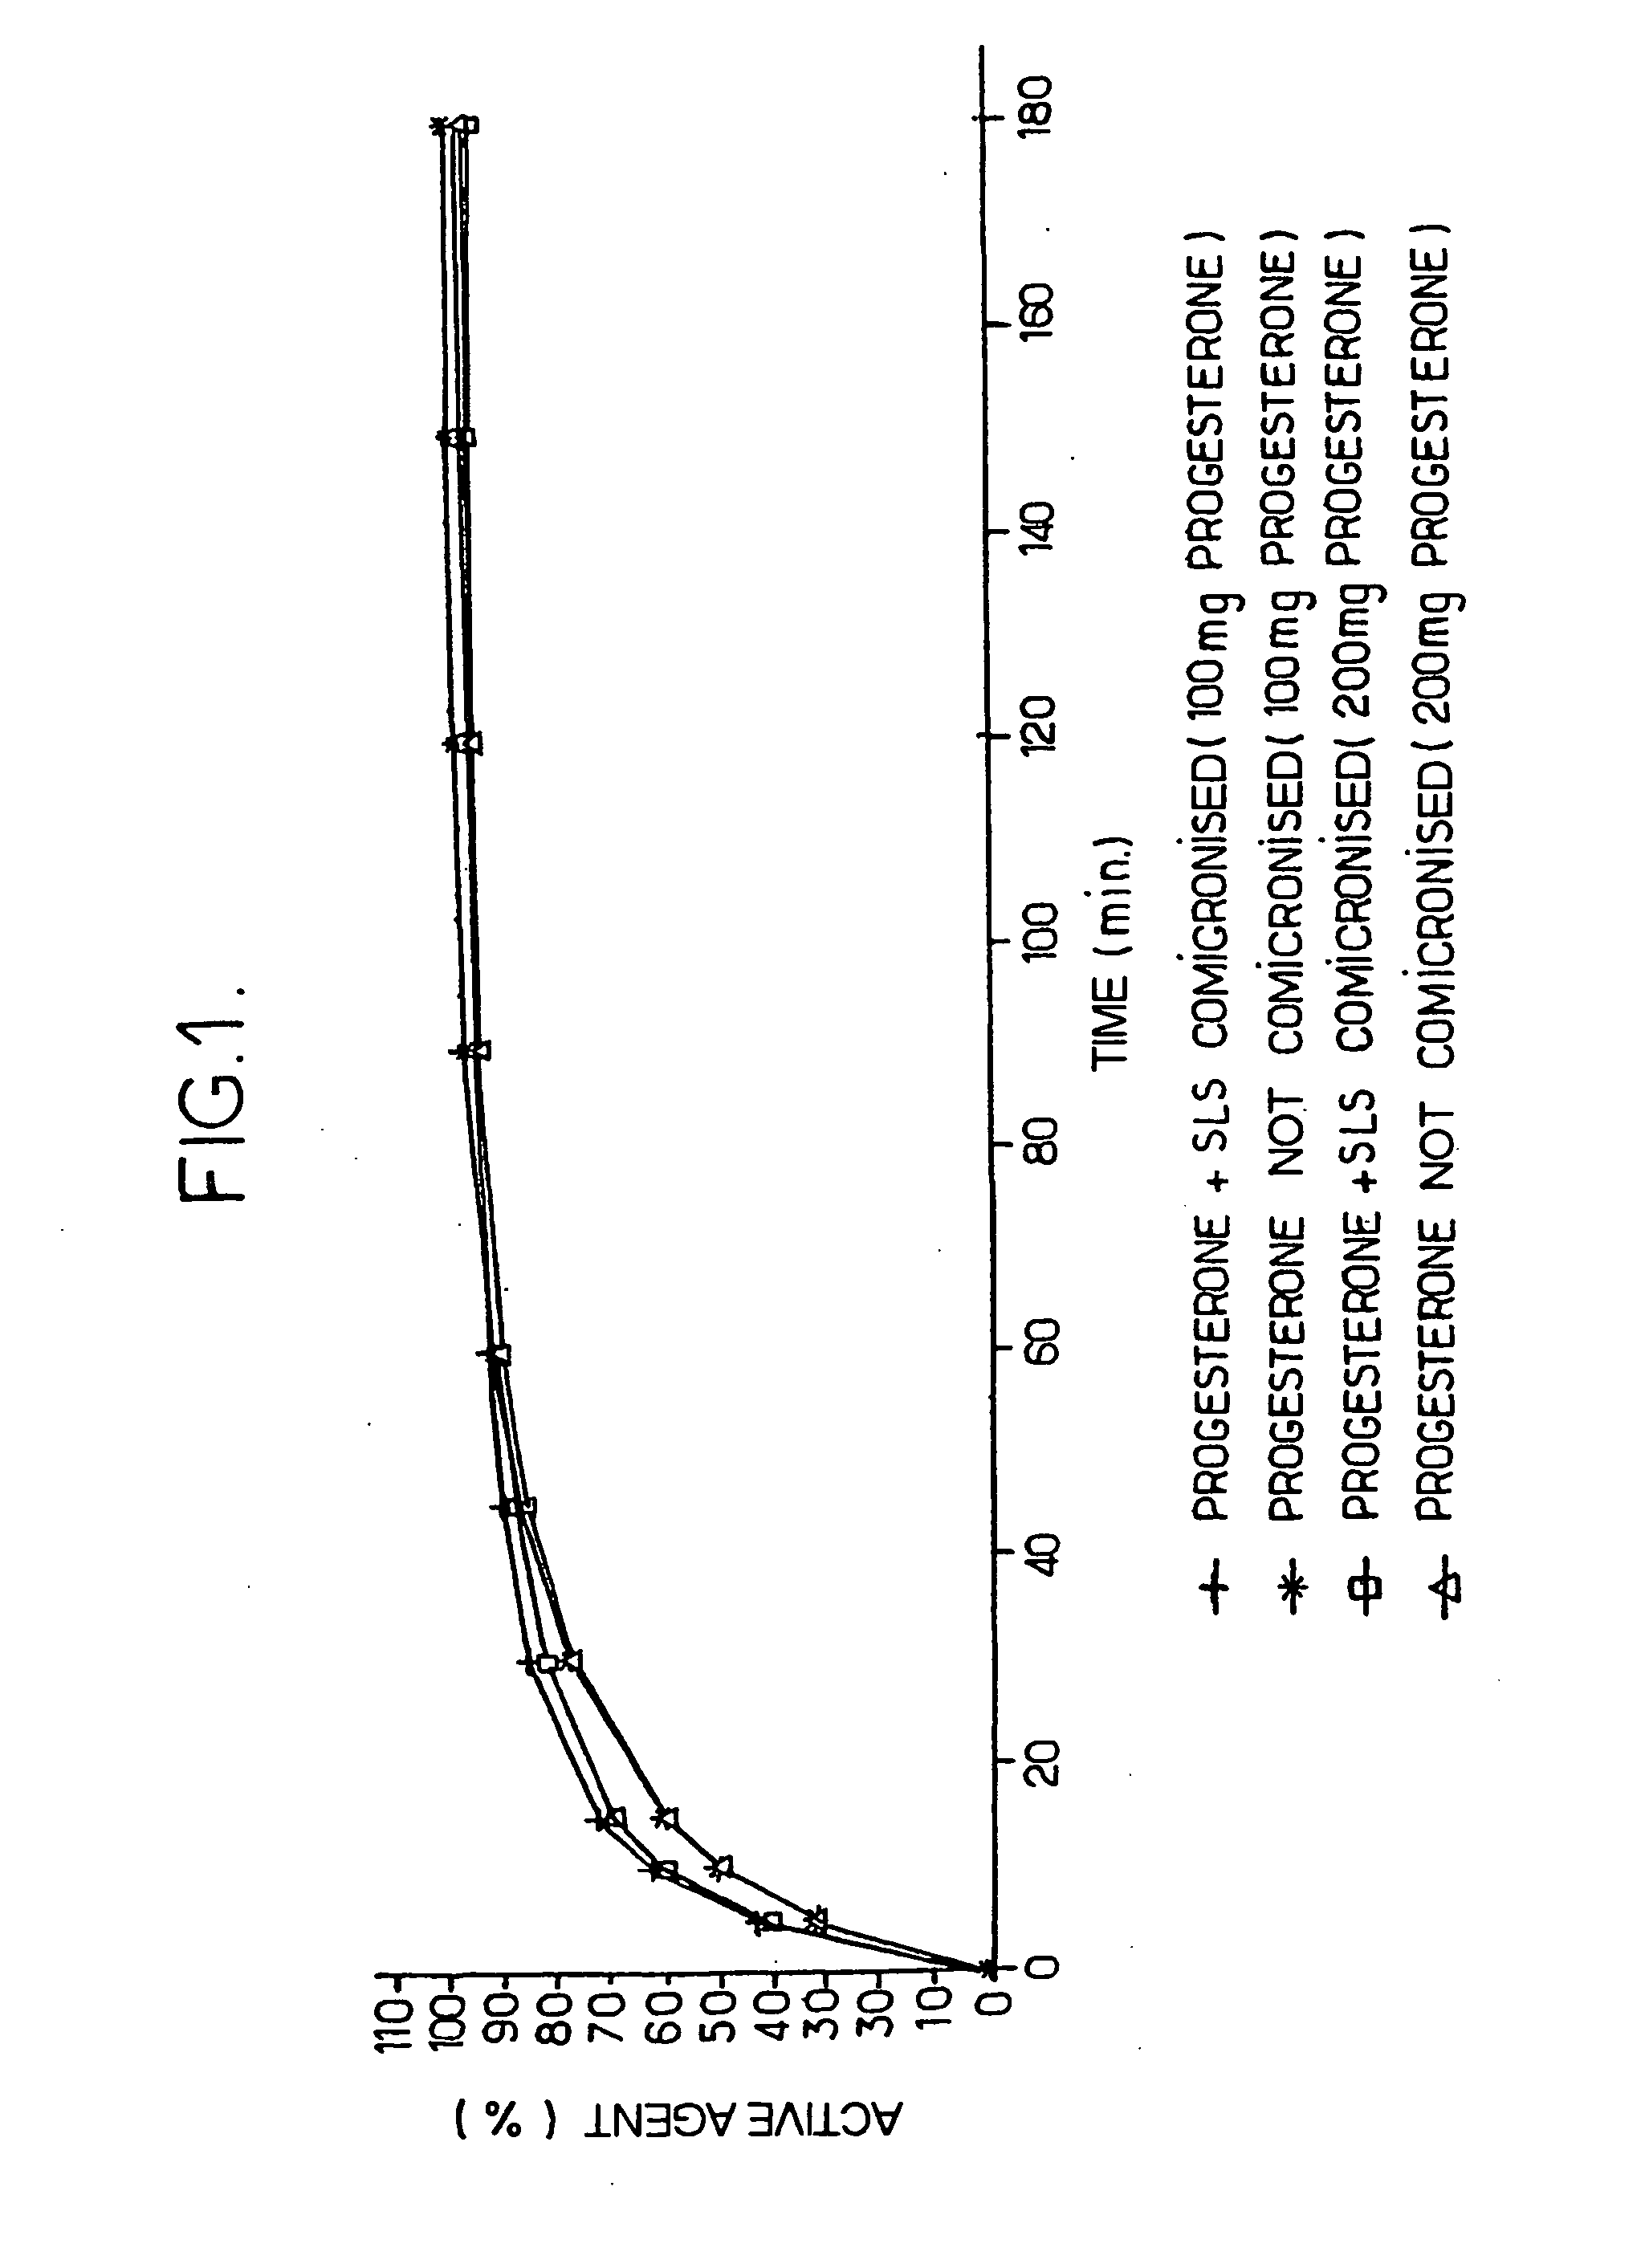 Progestin co-micronized with a surfactant, pharmaceutical composition comprising same, methods for making same and uses thereof